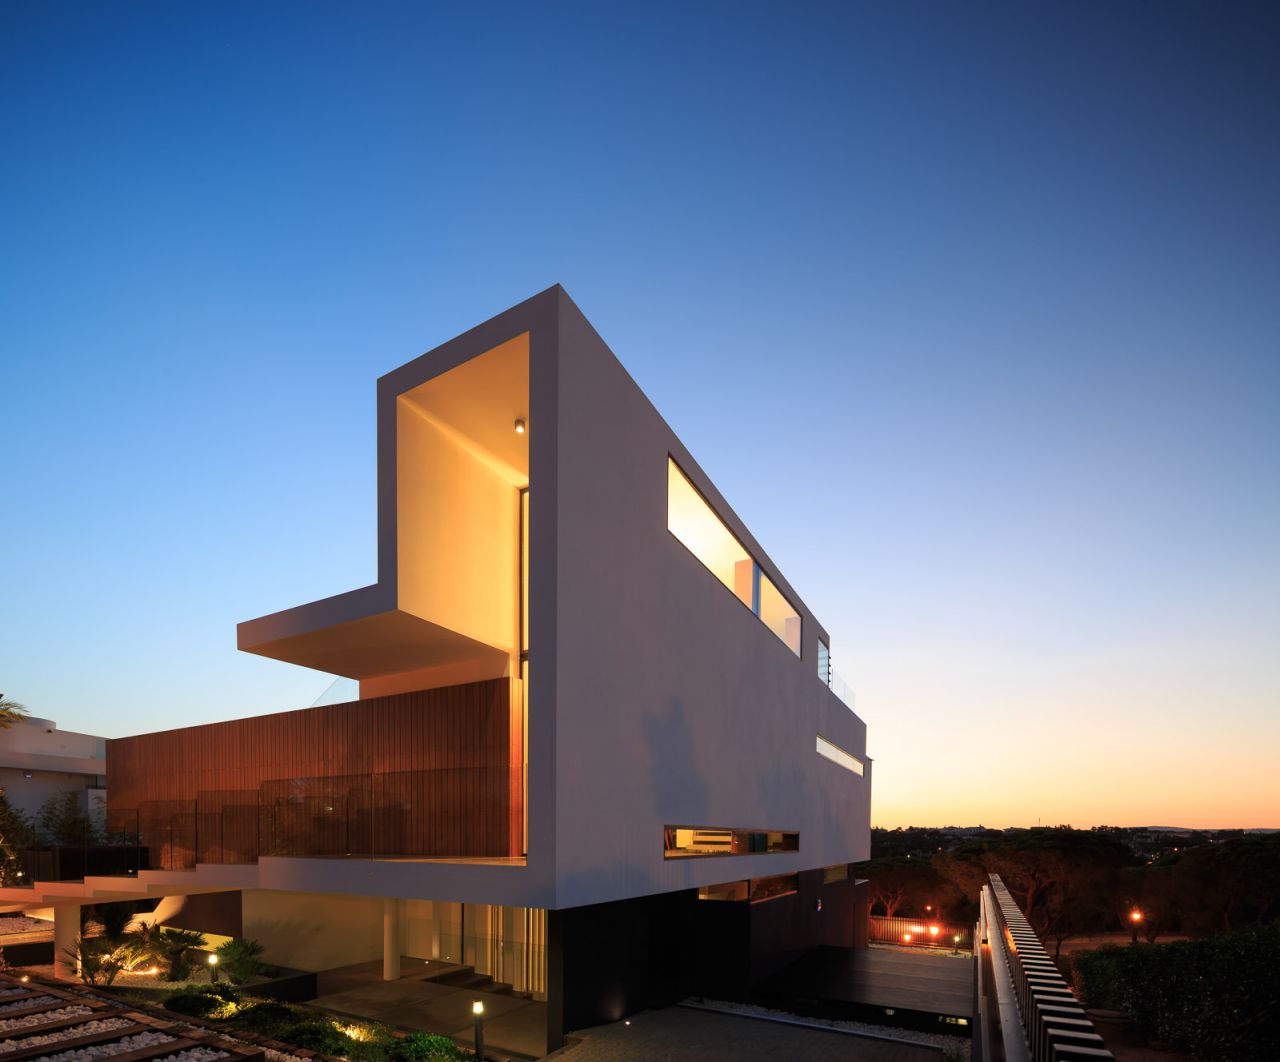 Casa-Marah-in-Portugal-by-Arquimais-Architecture-and-Design-26